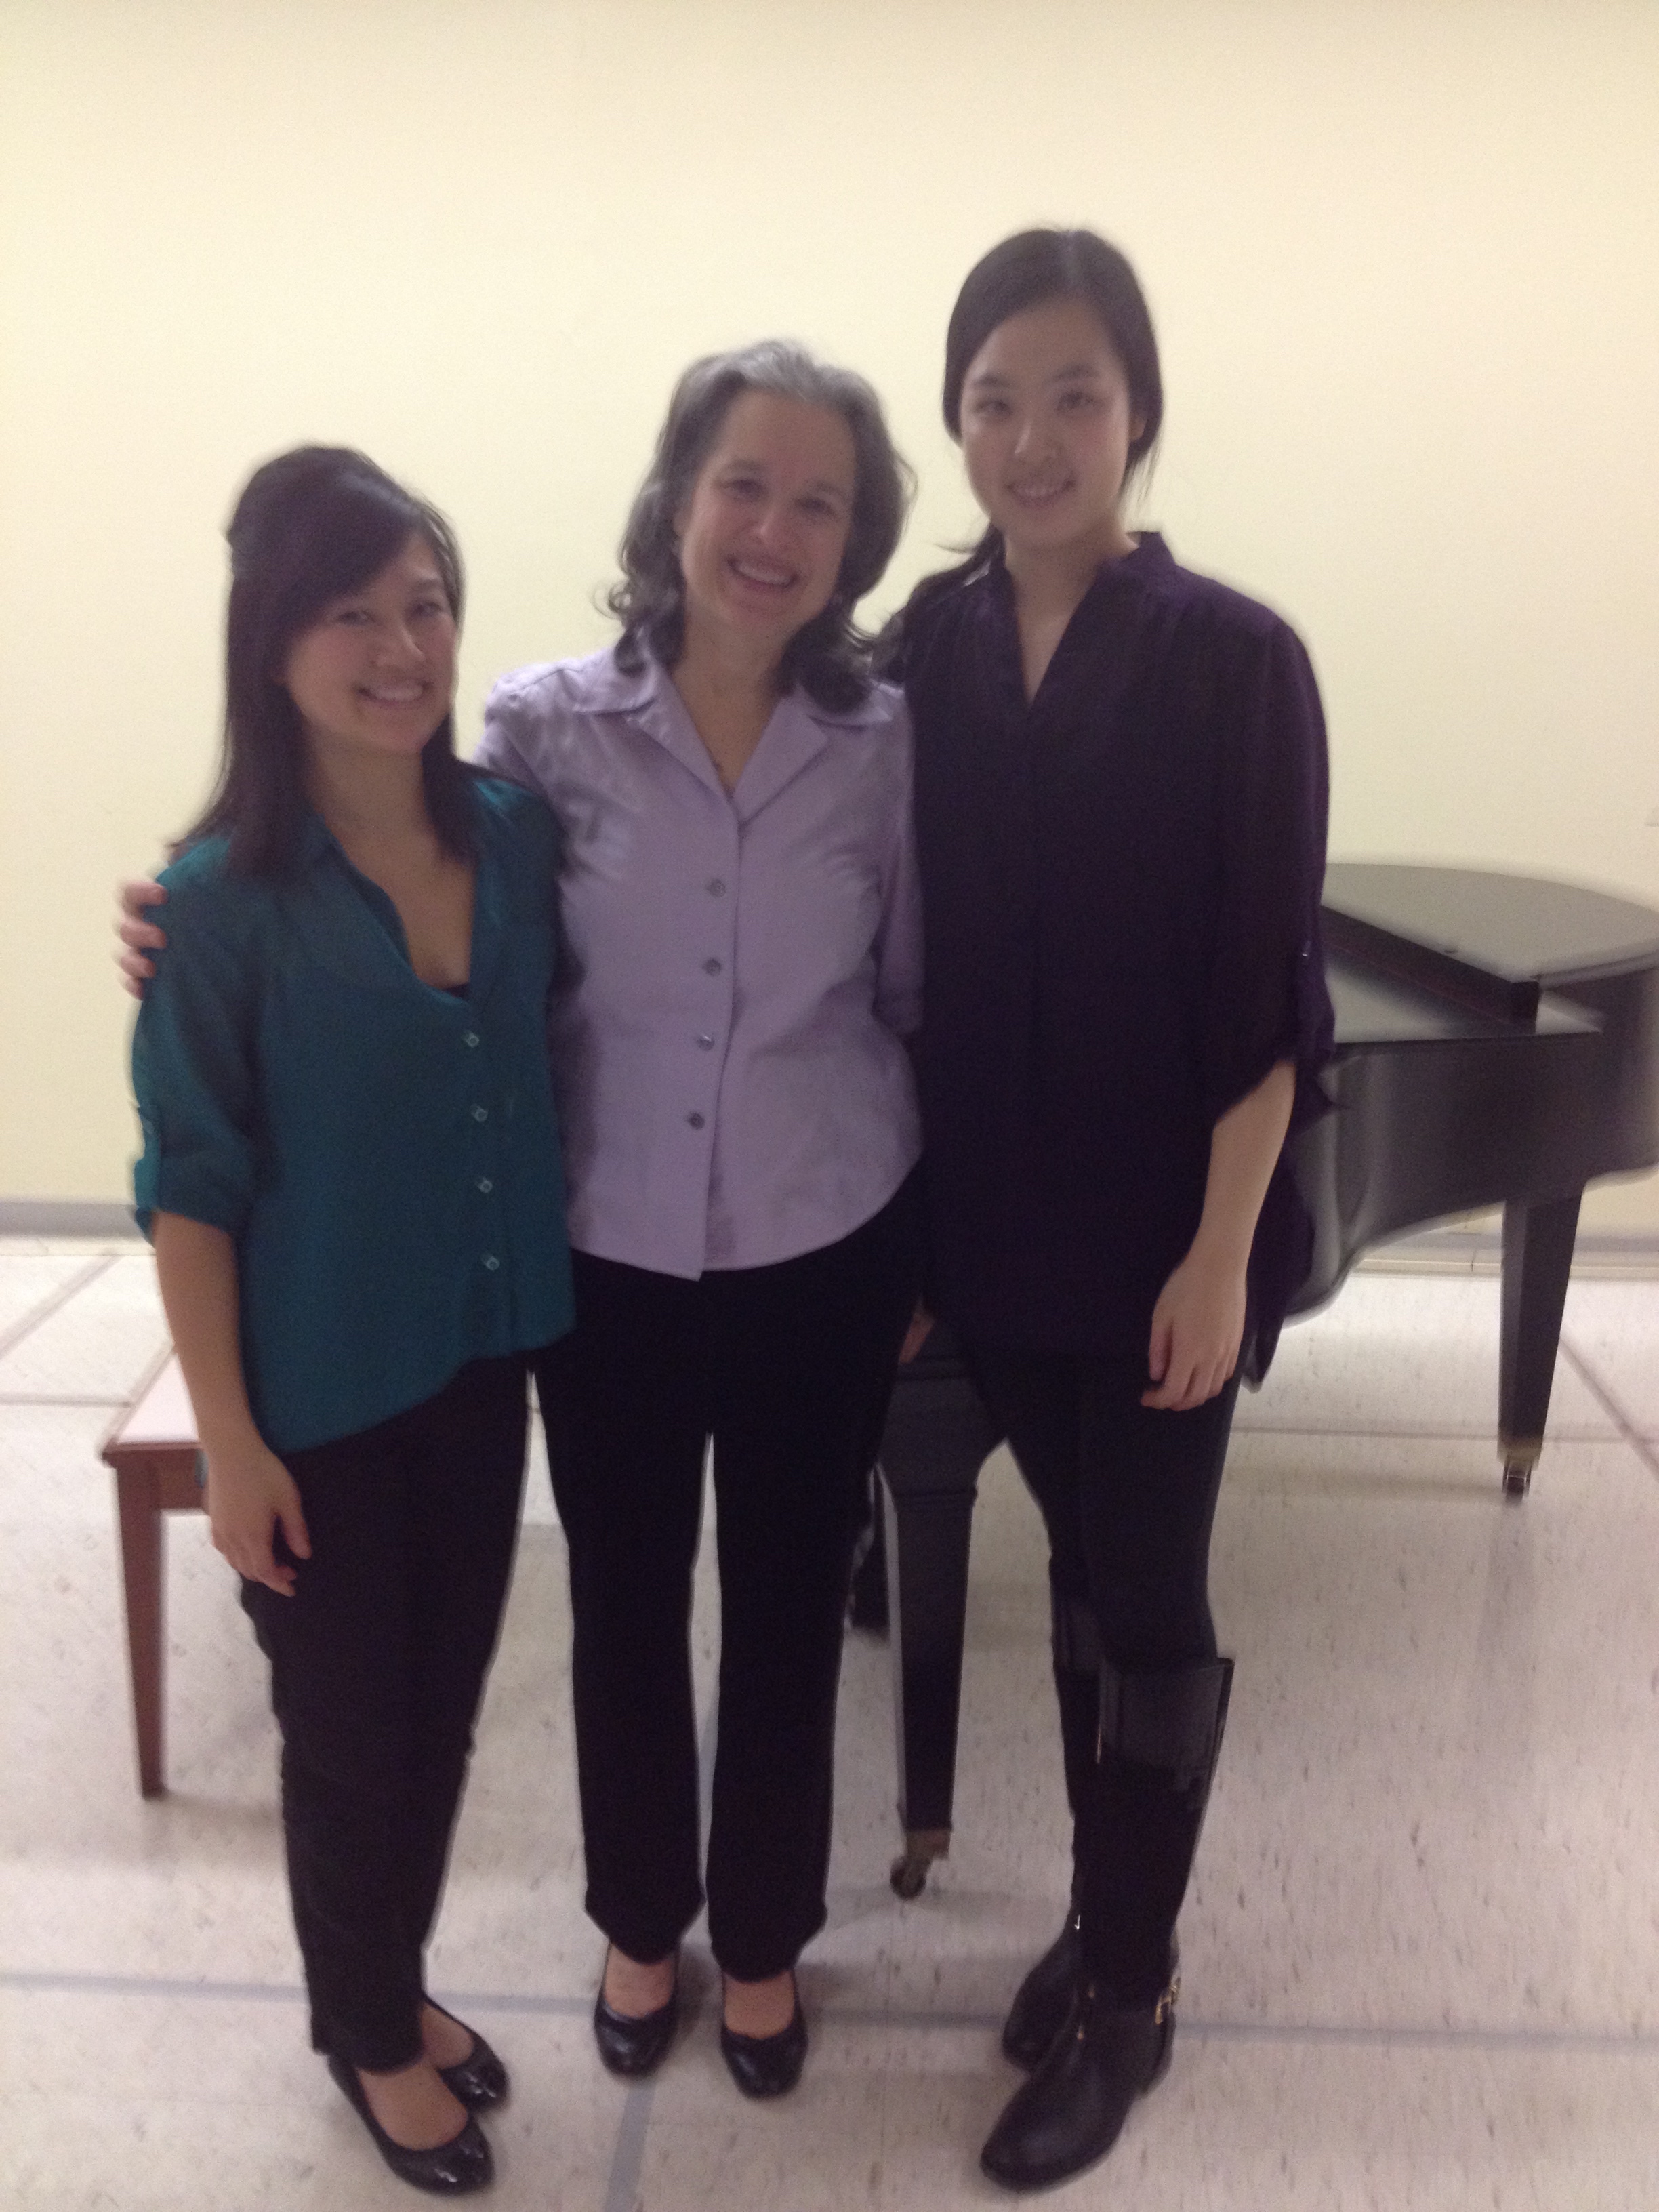  Violinist  Letitia Jap &nbsp;with  Diane &nbsp;and cellist  Minji Kim &nbsp;after their performance of  Musical Treasures &nbsp;at the Spaulding Rehab Hospital in Cambridge, MA on Sunday November 23, 2015. 